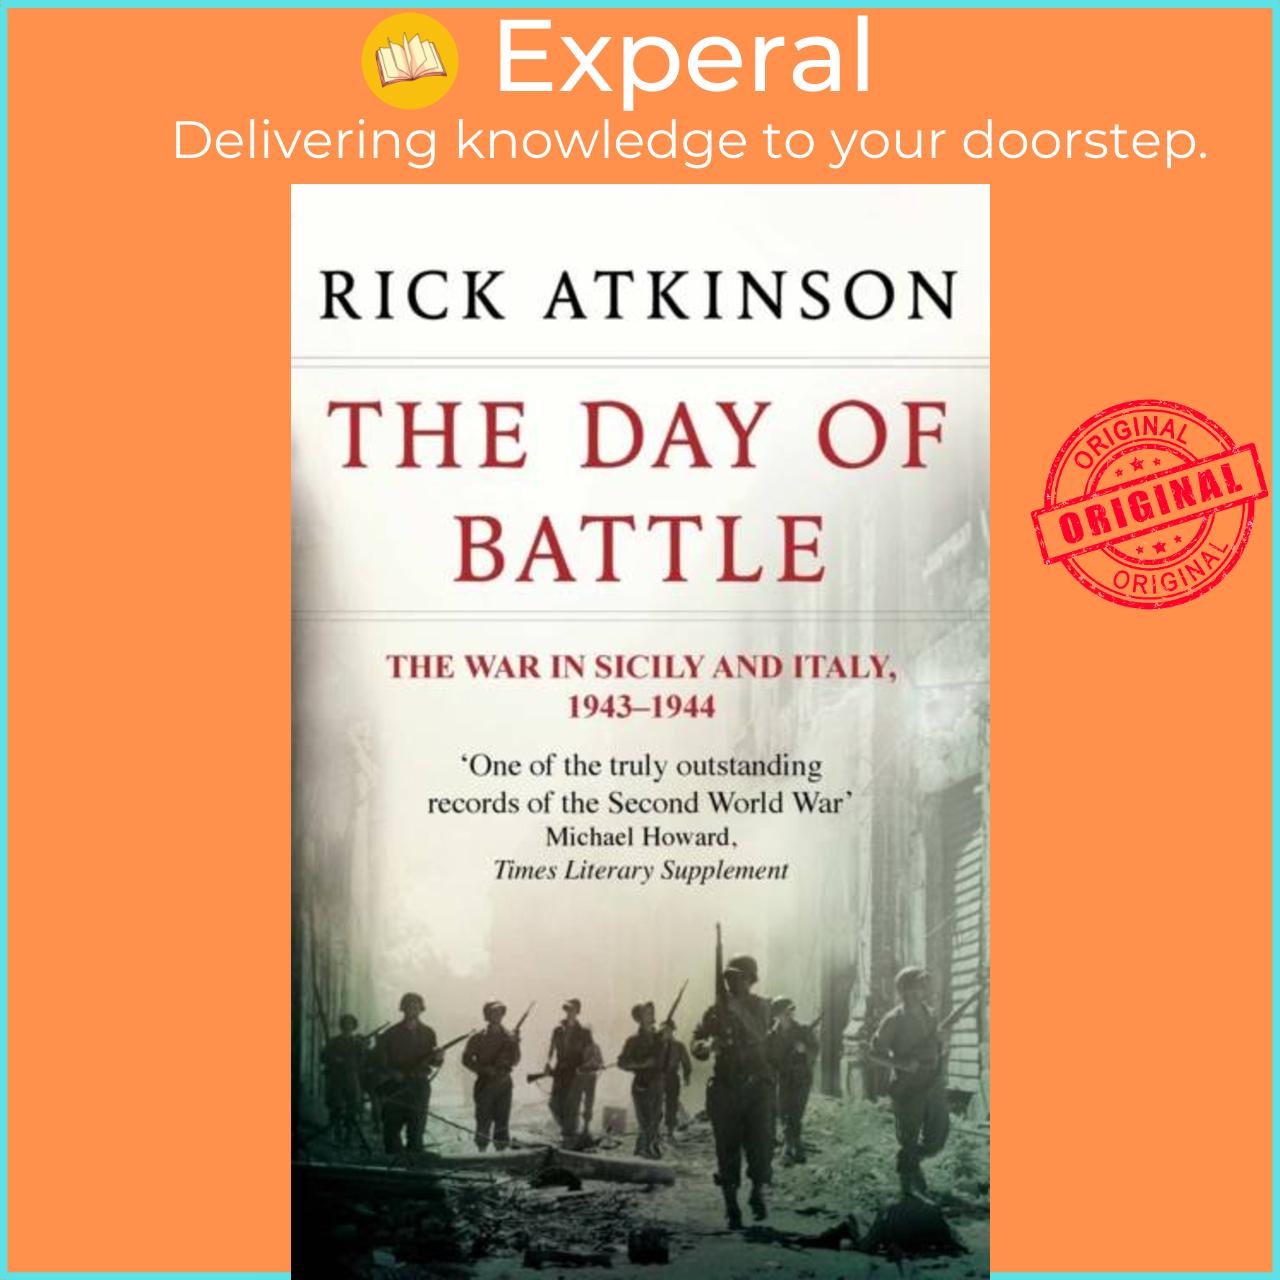 Sách - The Day Of Battle - The War in Sicily and Italy 1943-44 by Rick Atkinson (UK edition, paperback)